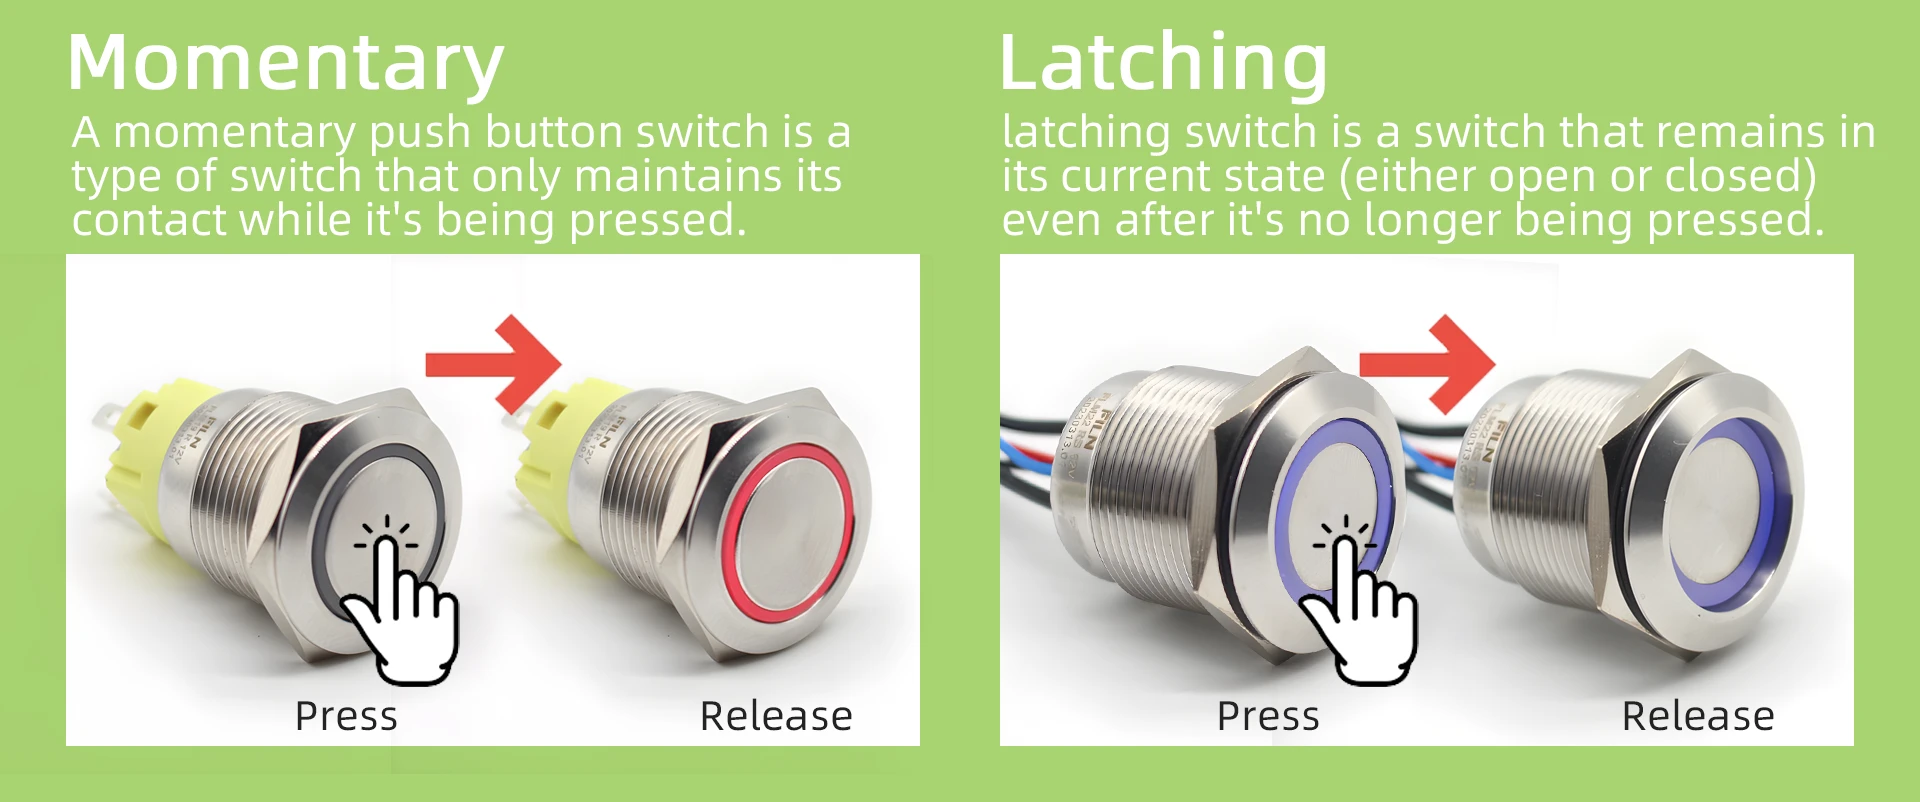 momentary and latching push button switch